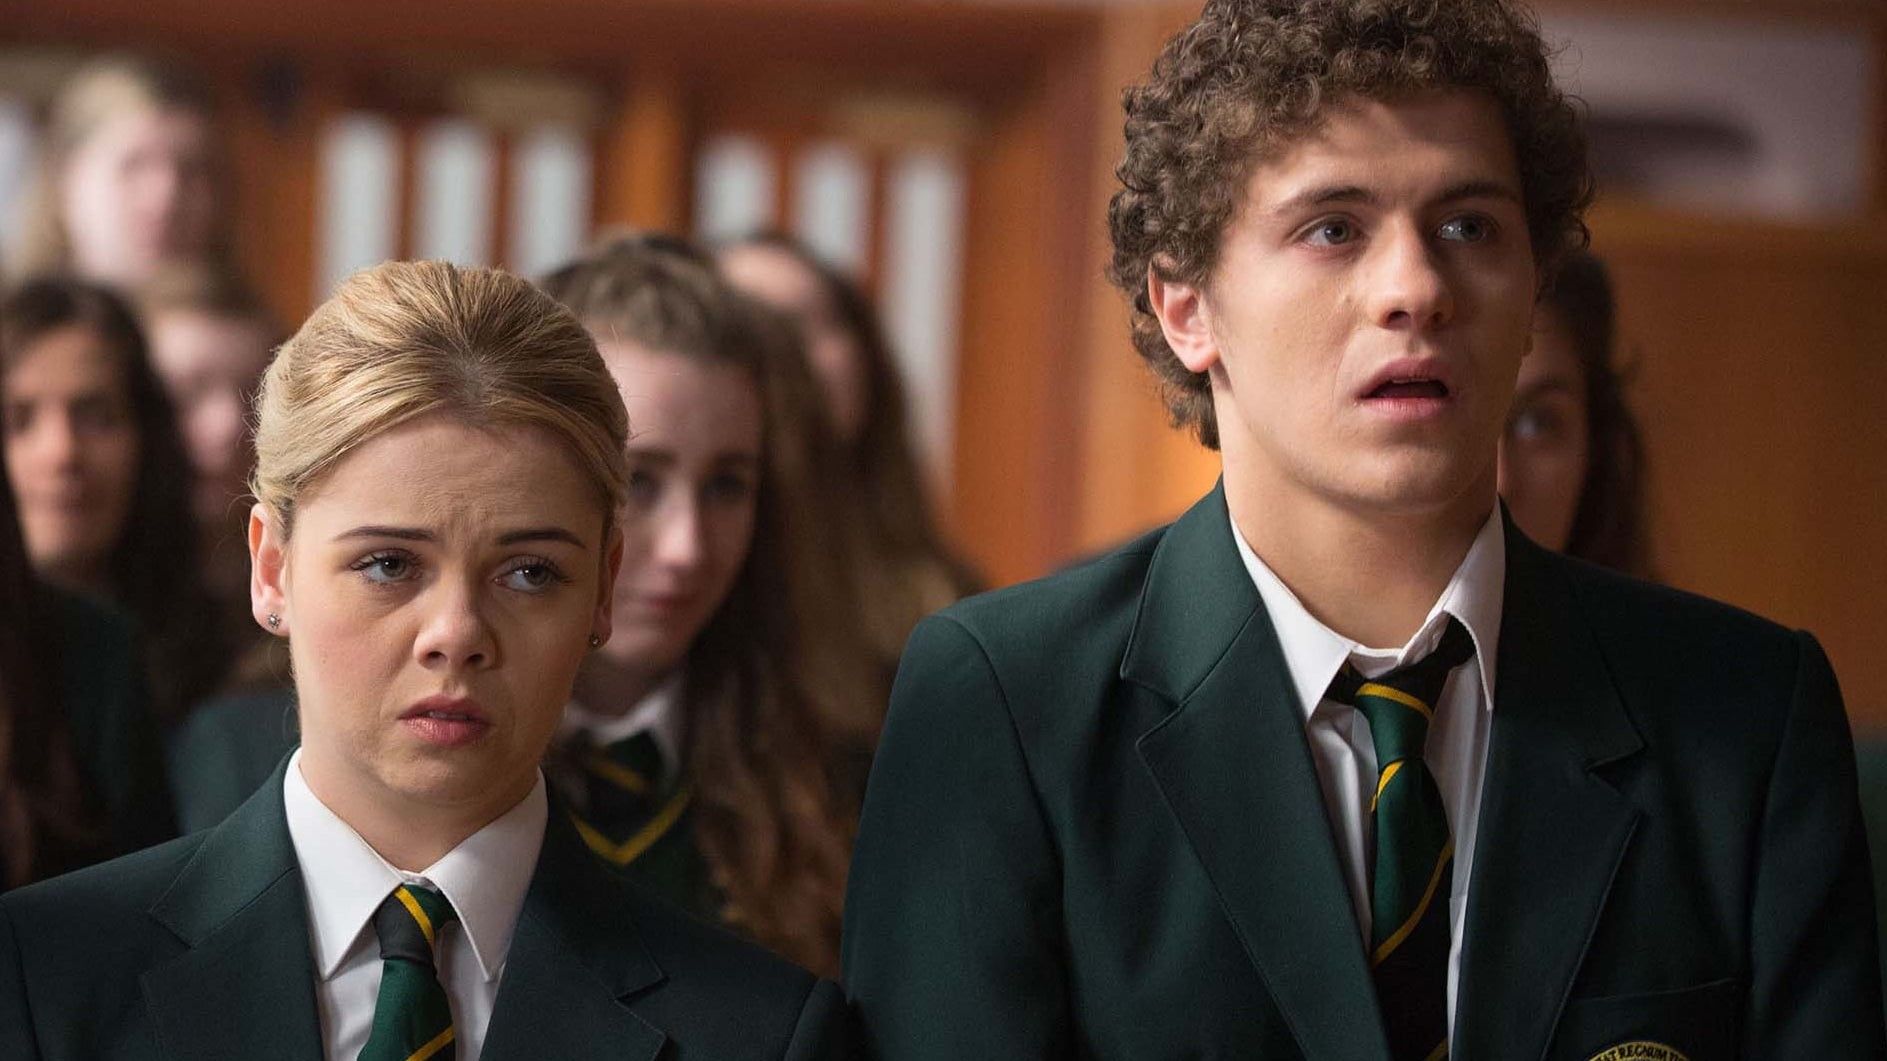 Derry Girls: James Maguire as a Symbol for Peace?